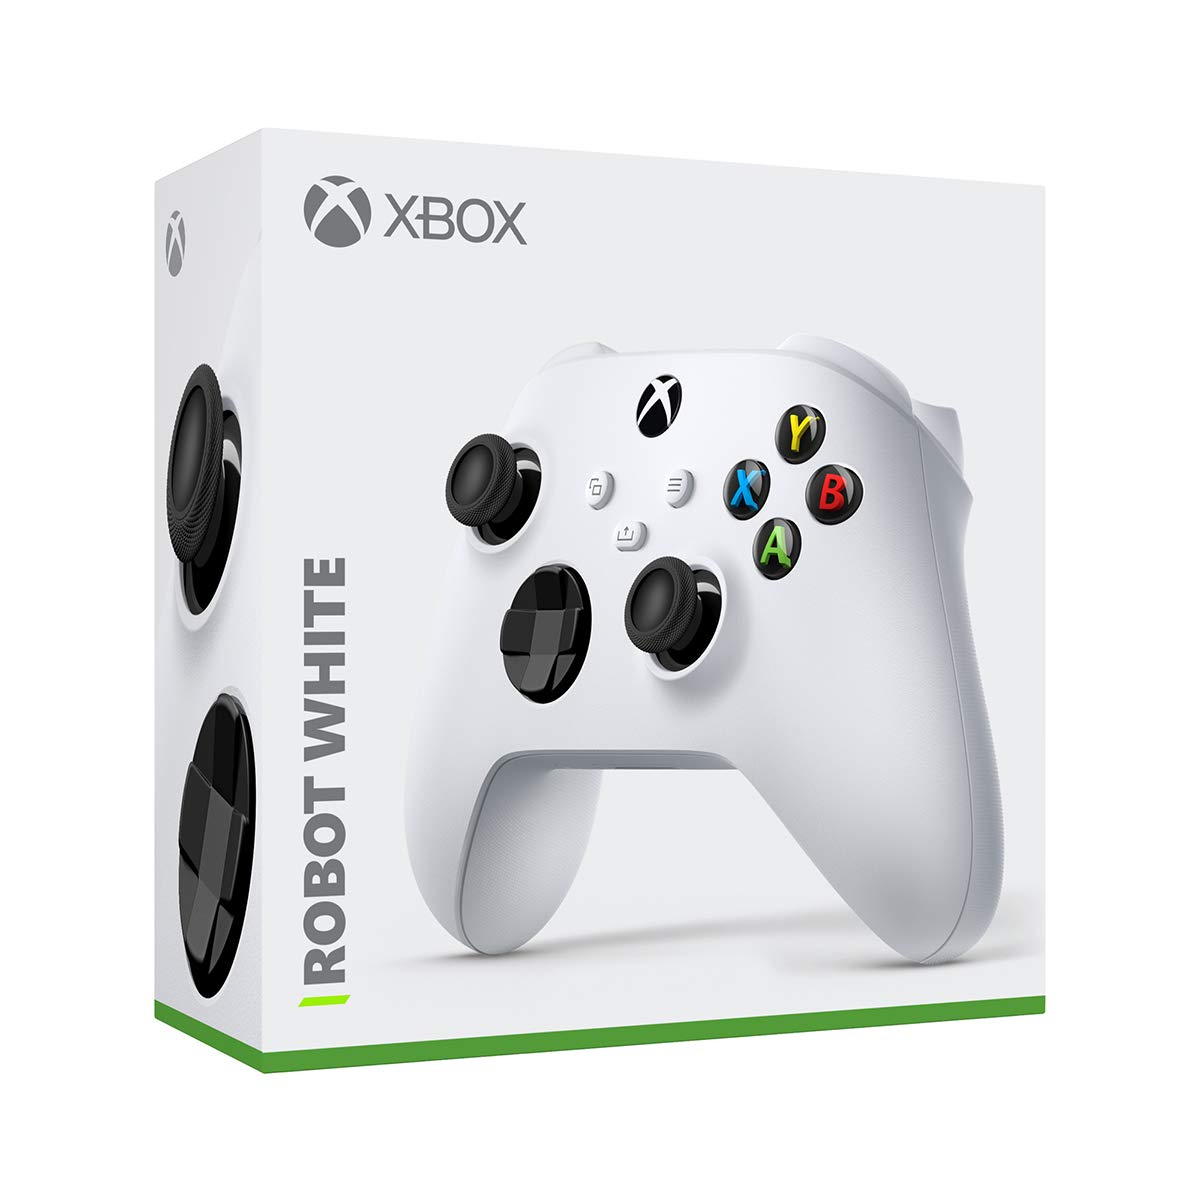 4 Pack Microsoft Xbox Bluetooth Wireless Controller For Series X/S - Robot White - Pro-Distributing